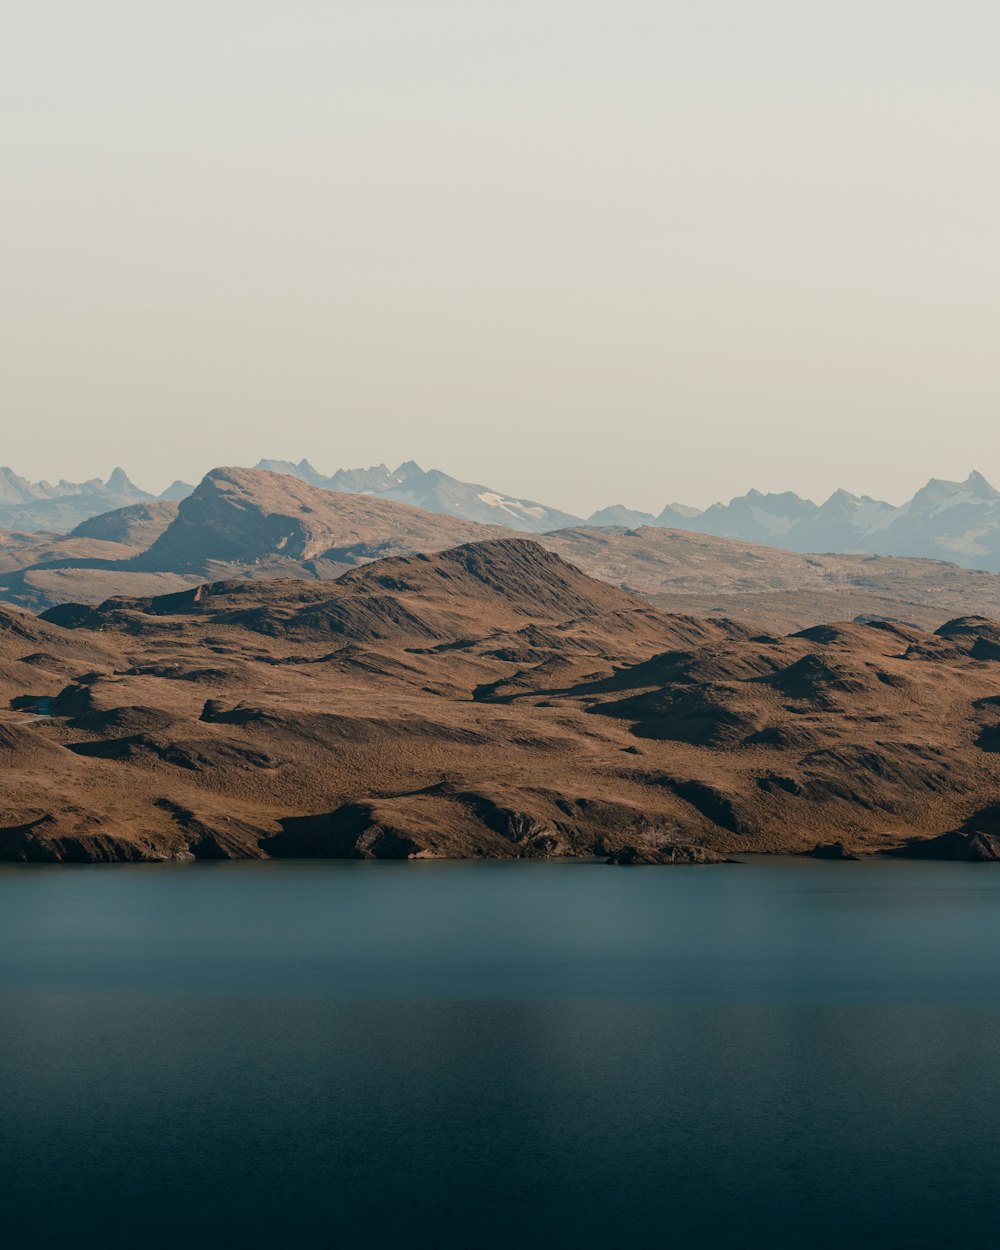 a mountain range with a body of water in the foreground